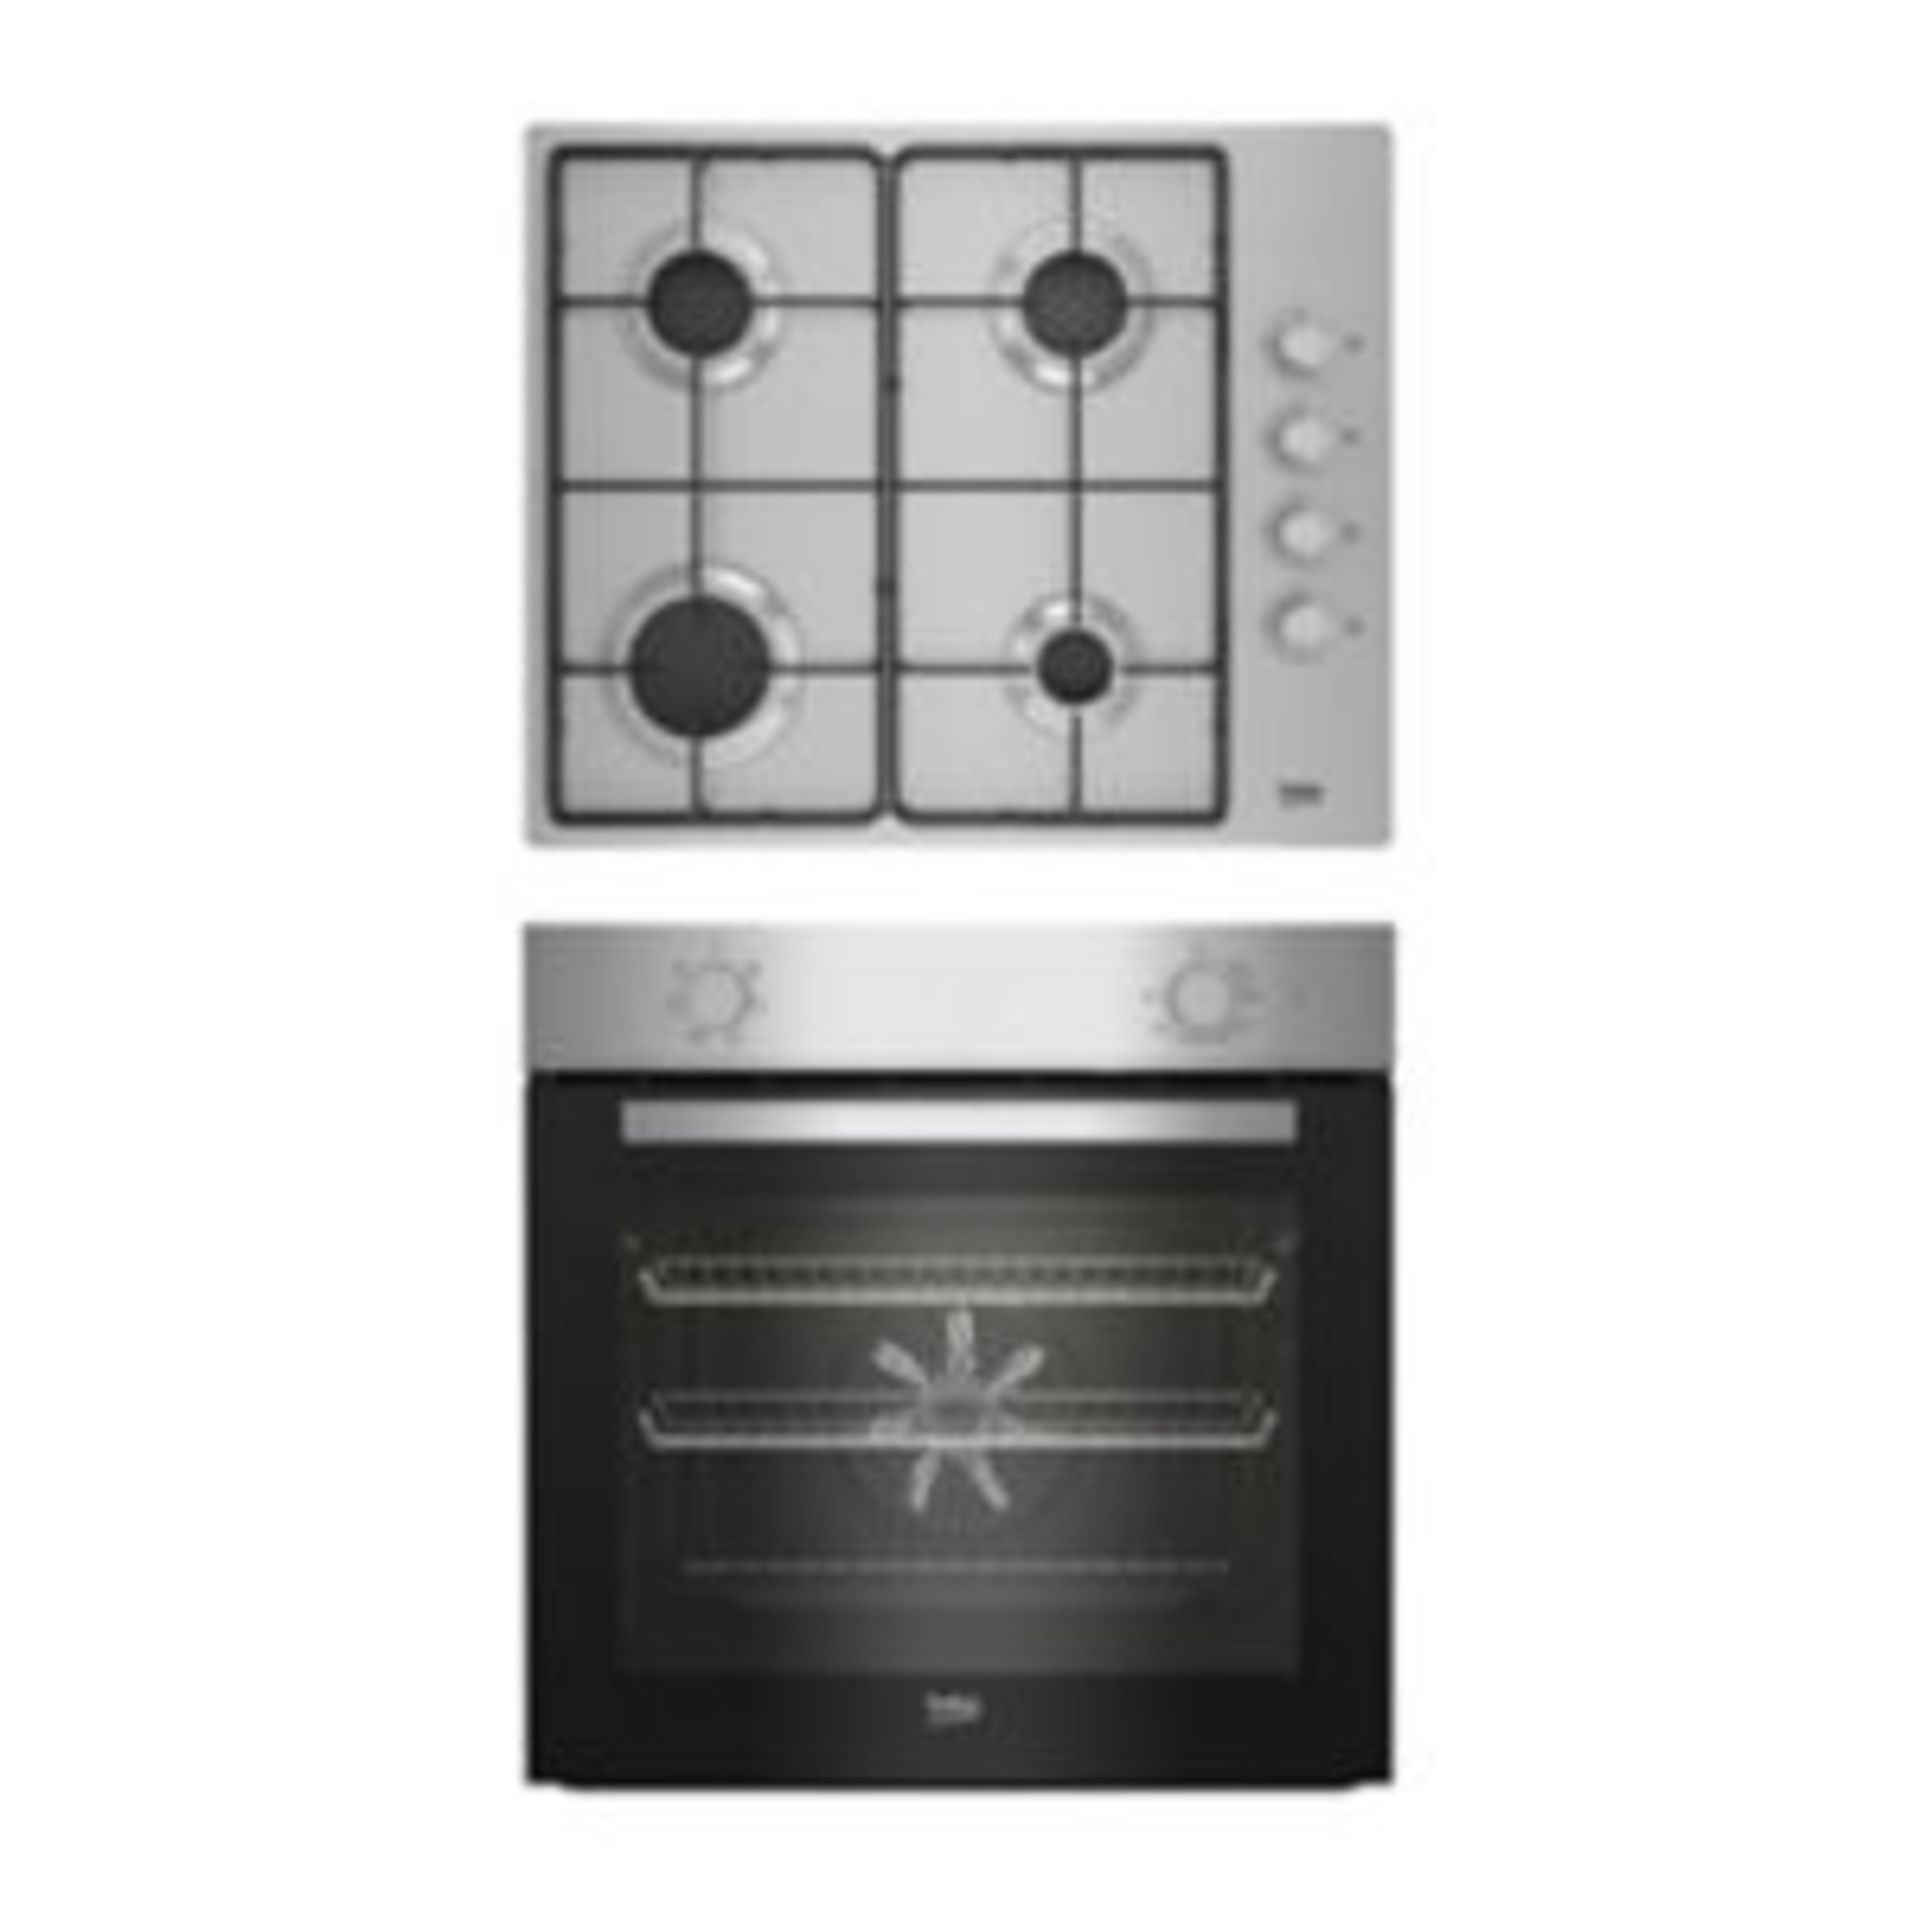 Beko Qbse223Sx Built-in Multifunction Oven - Stainless Steel - ER47 *Oven only - Oven contains no